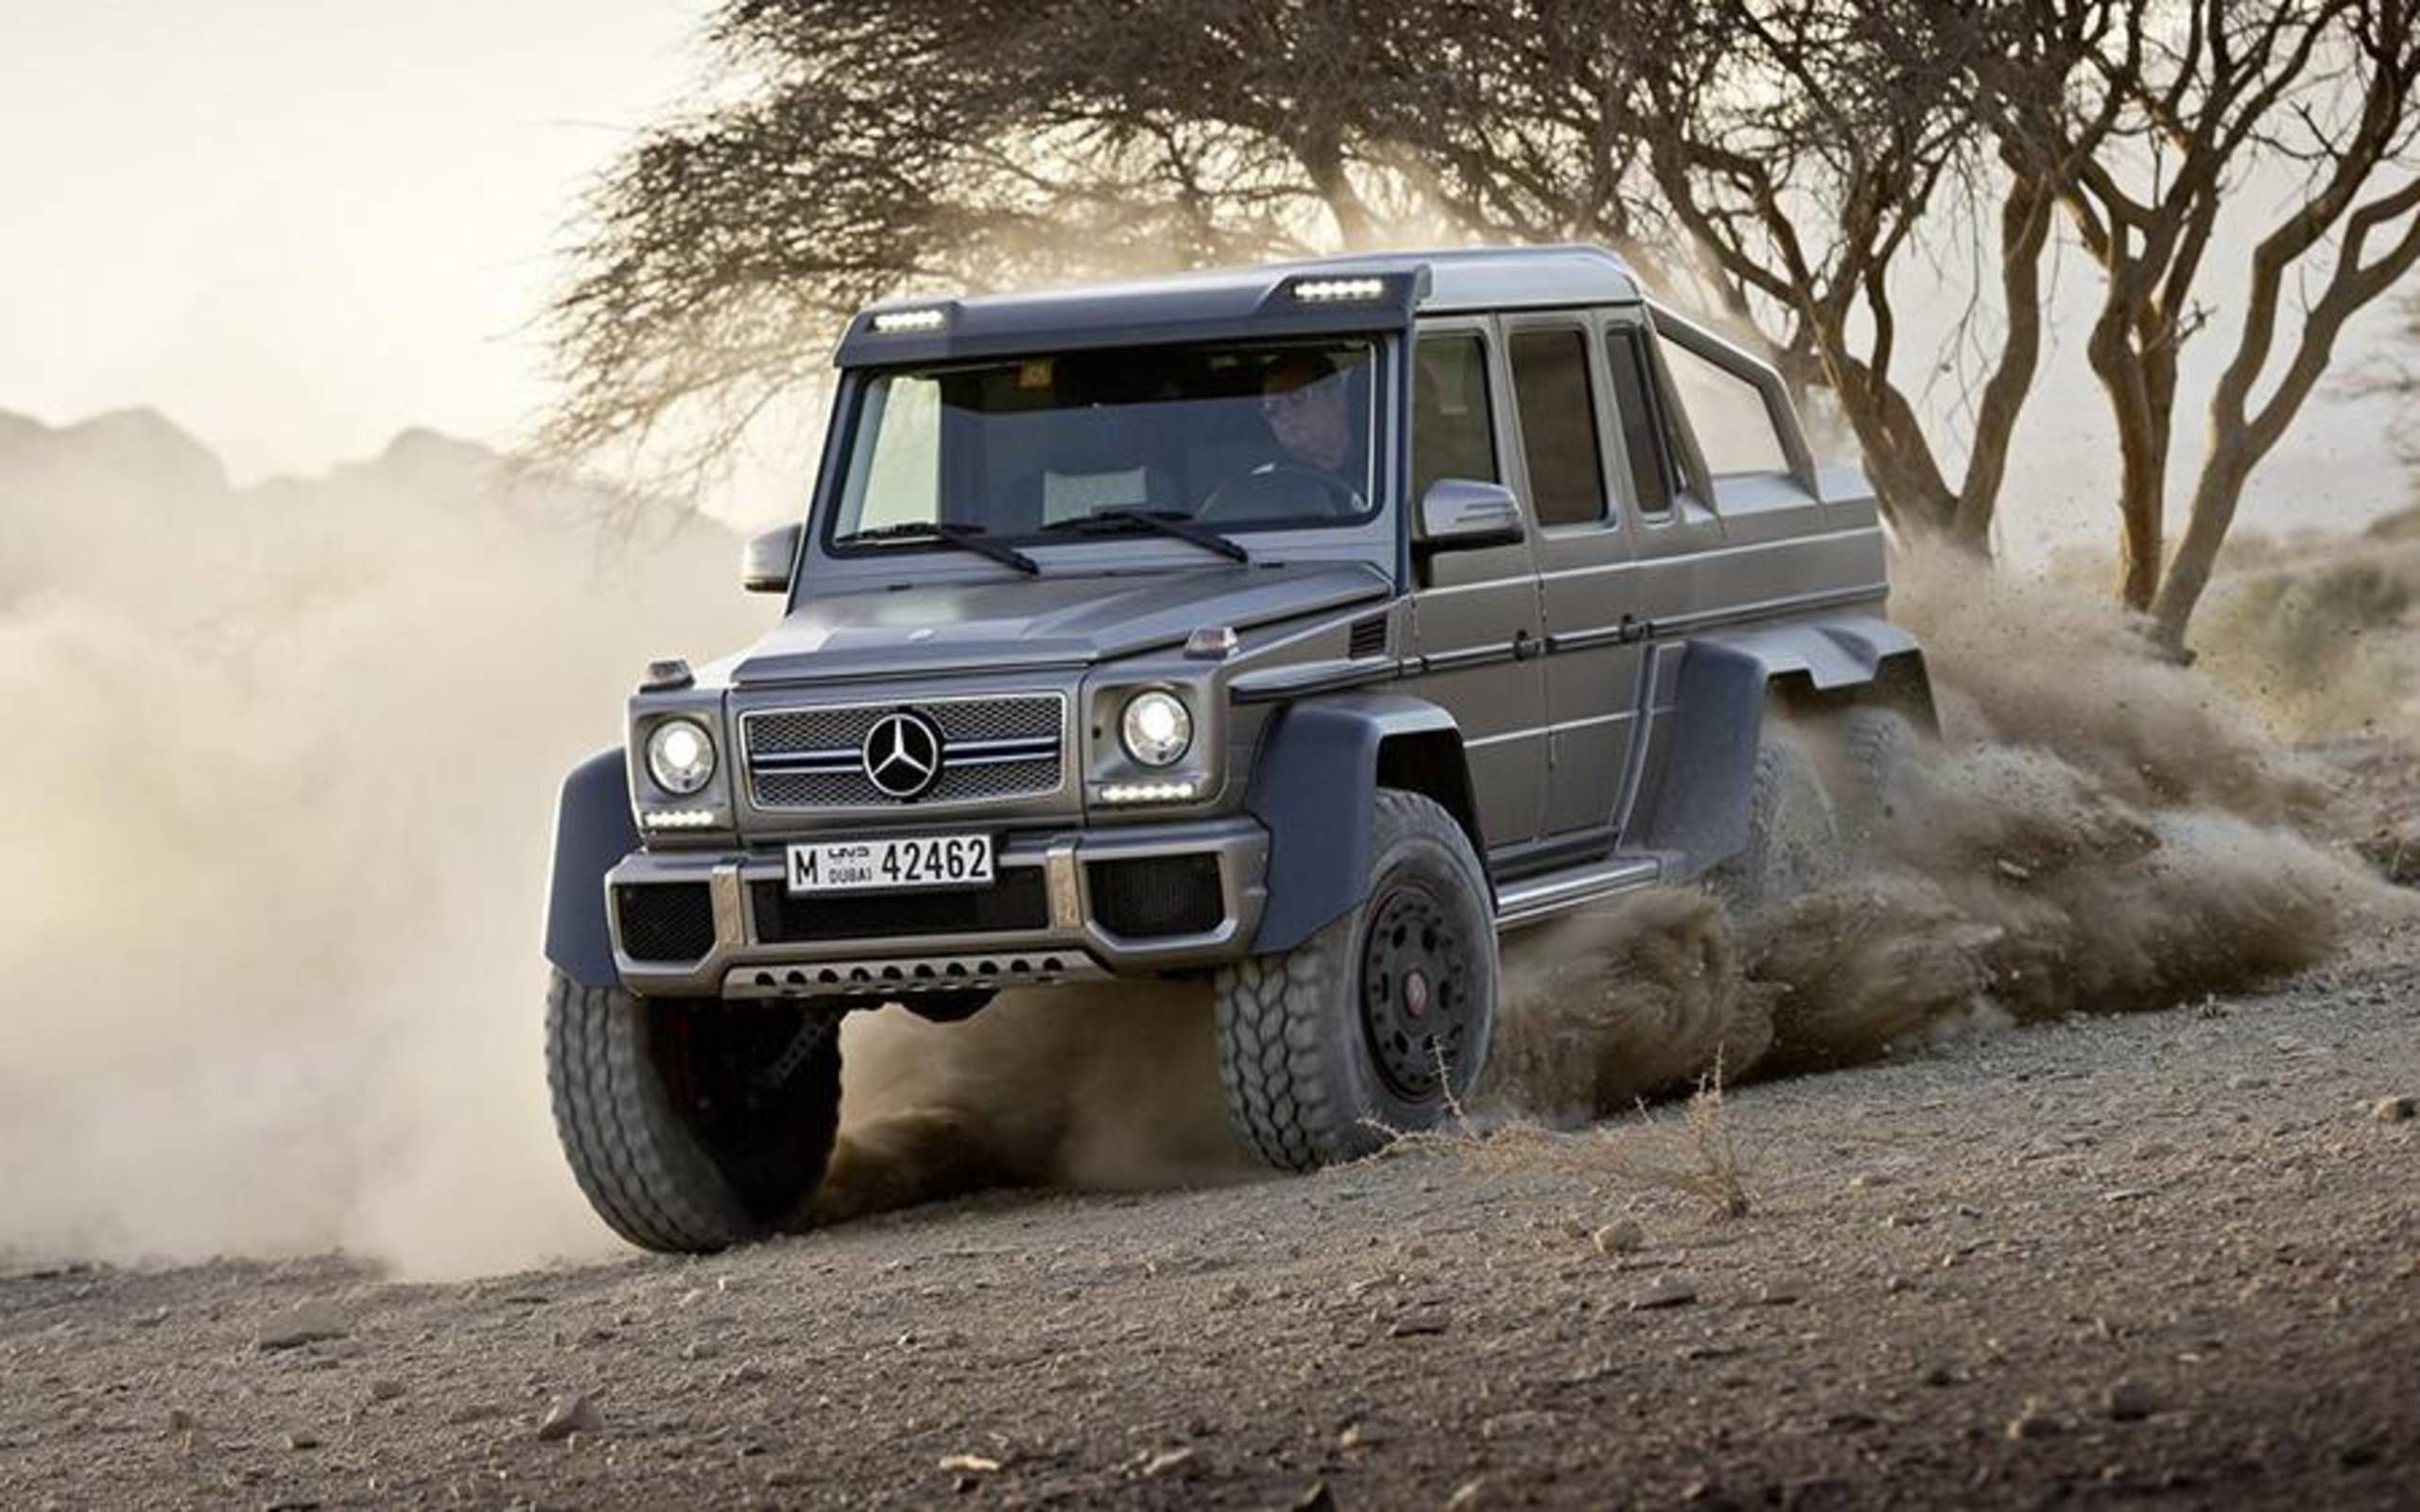 Mercedes Benz Prices The 2015 G63 Amg 6x6 Pickup For Europe